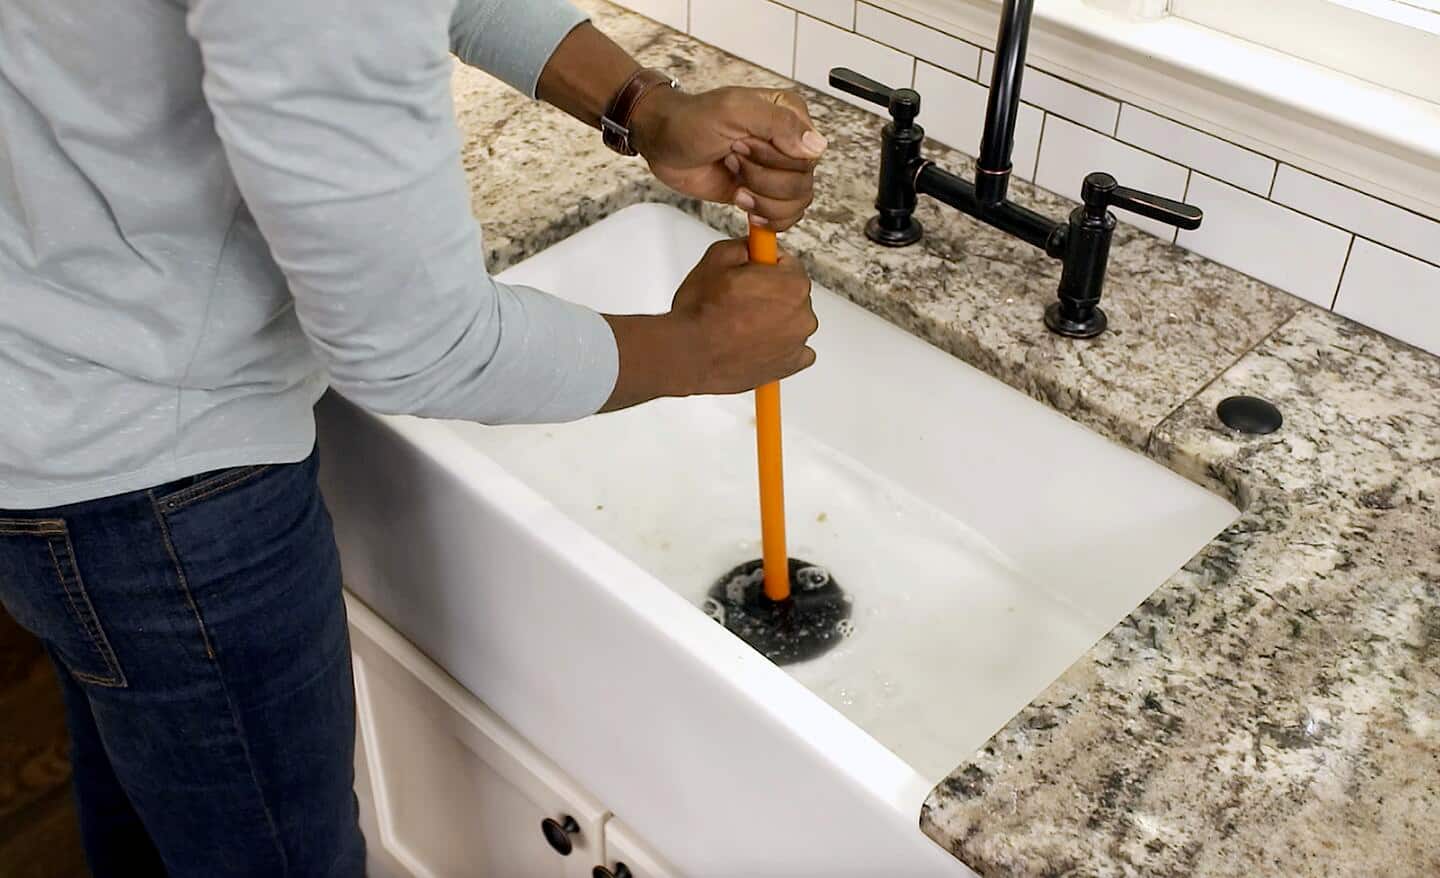 A person trying to unclog a sink using a plunger.